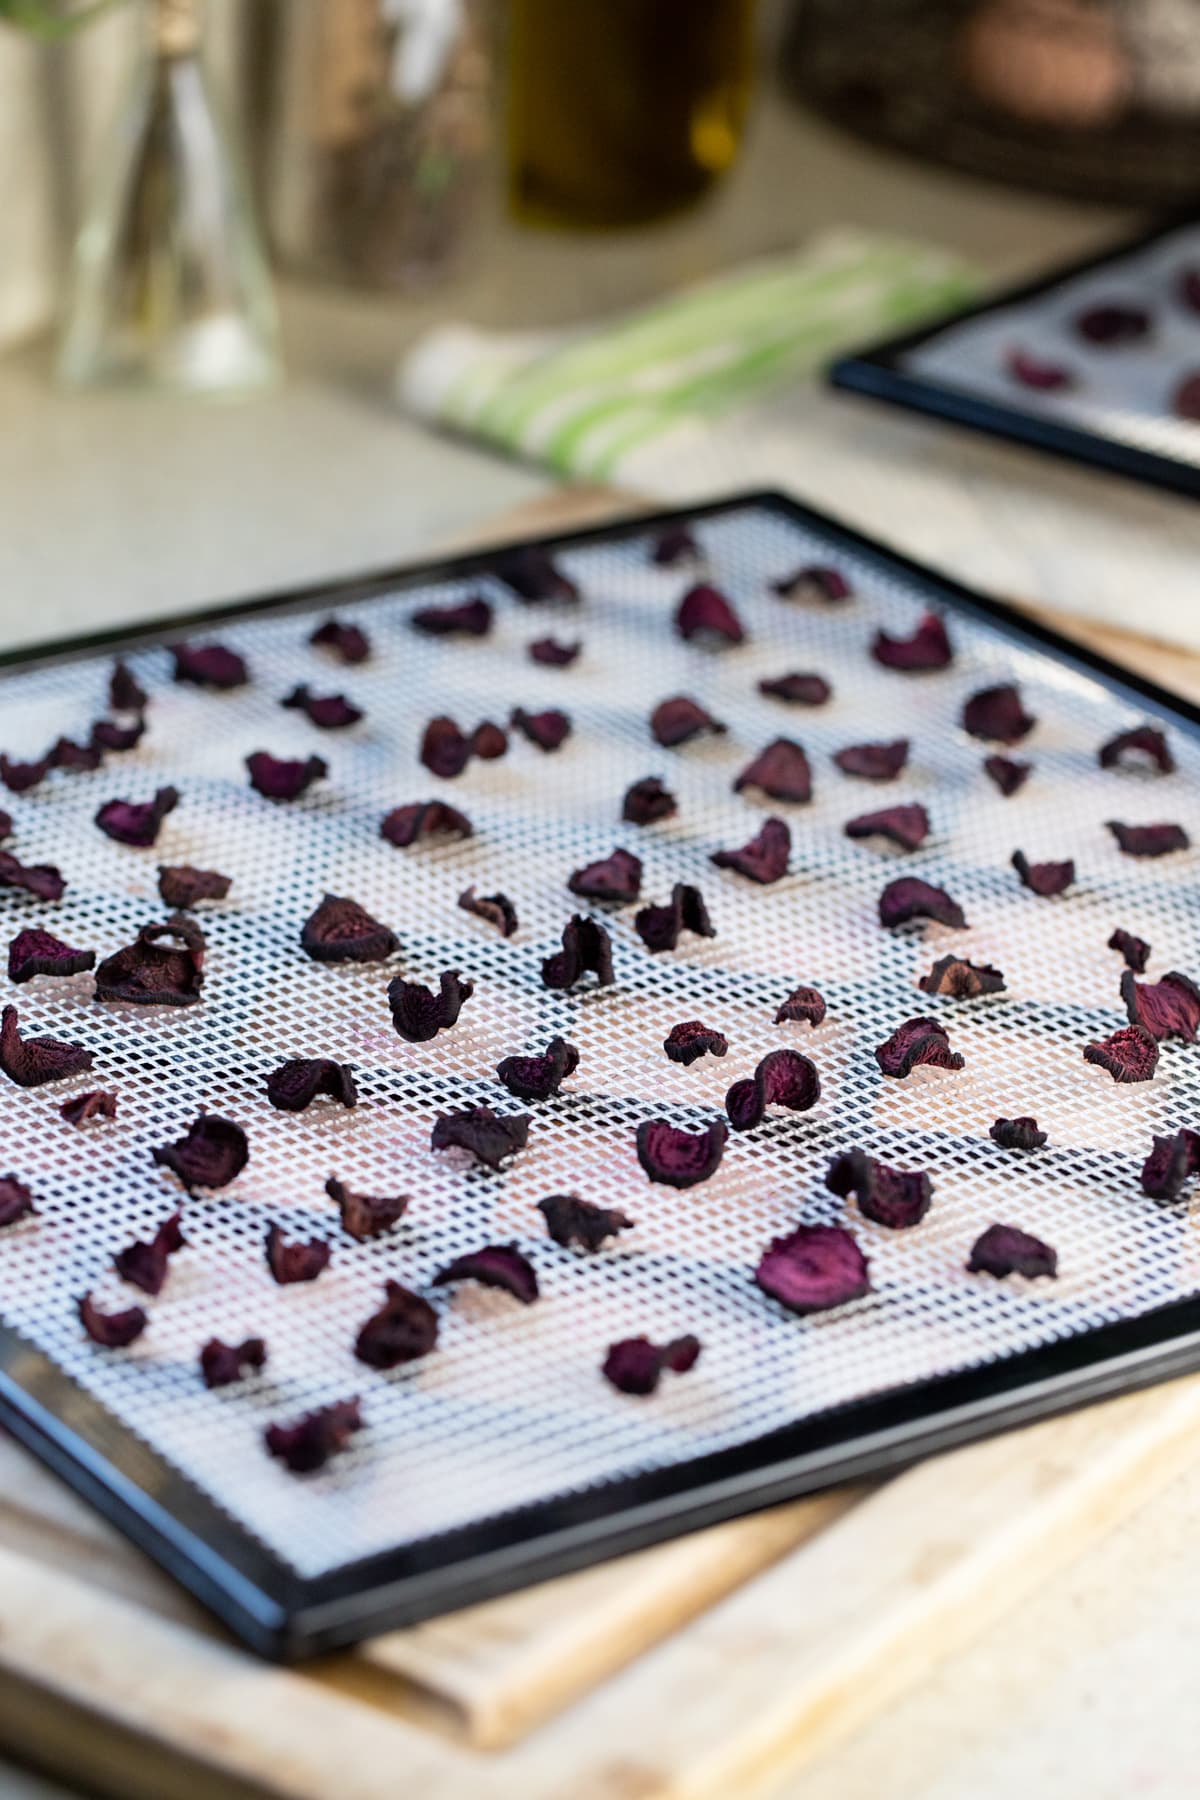 dehydrated beets on the tray of the dehydrator